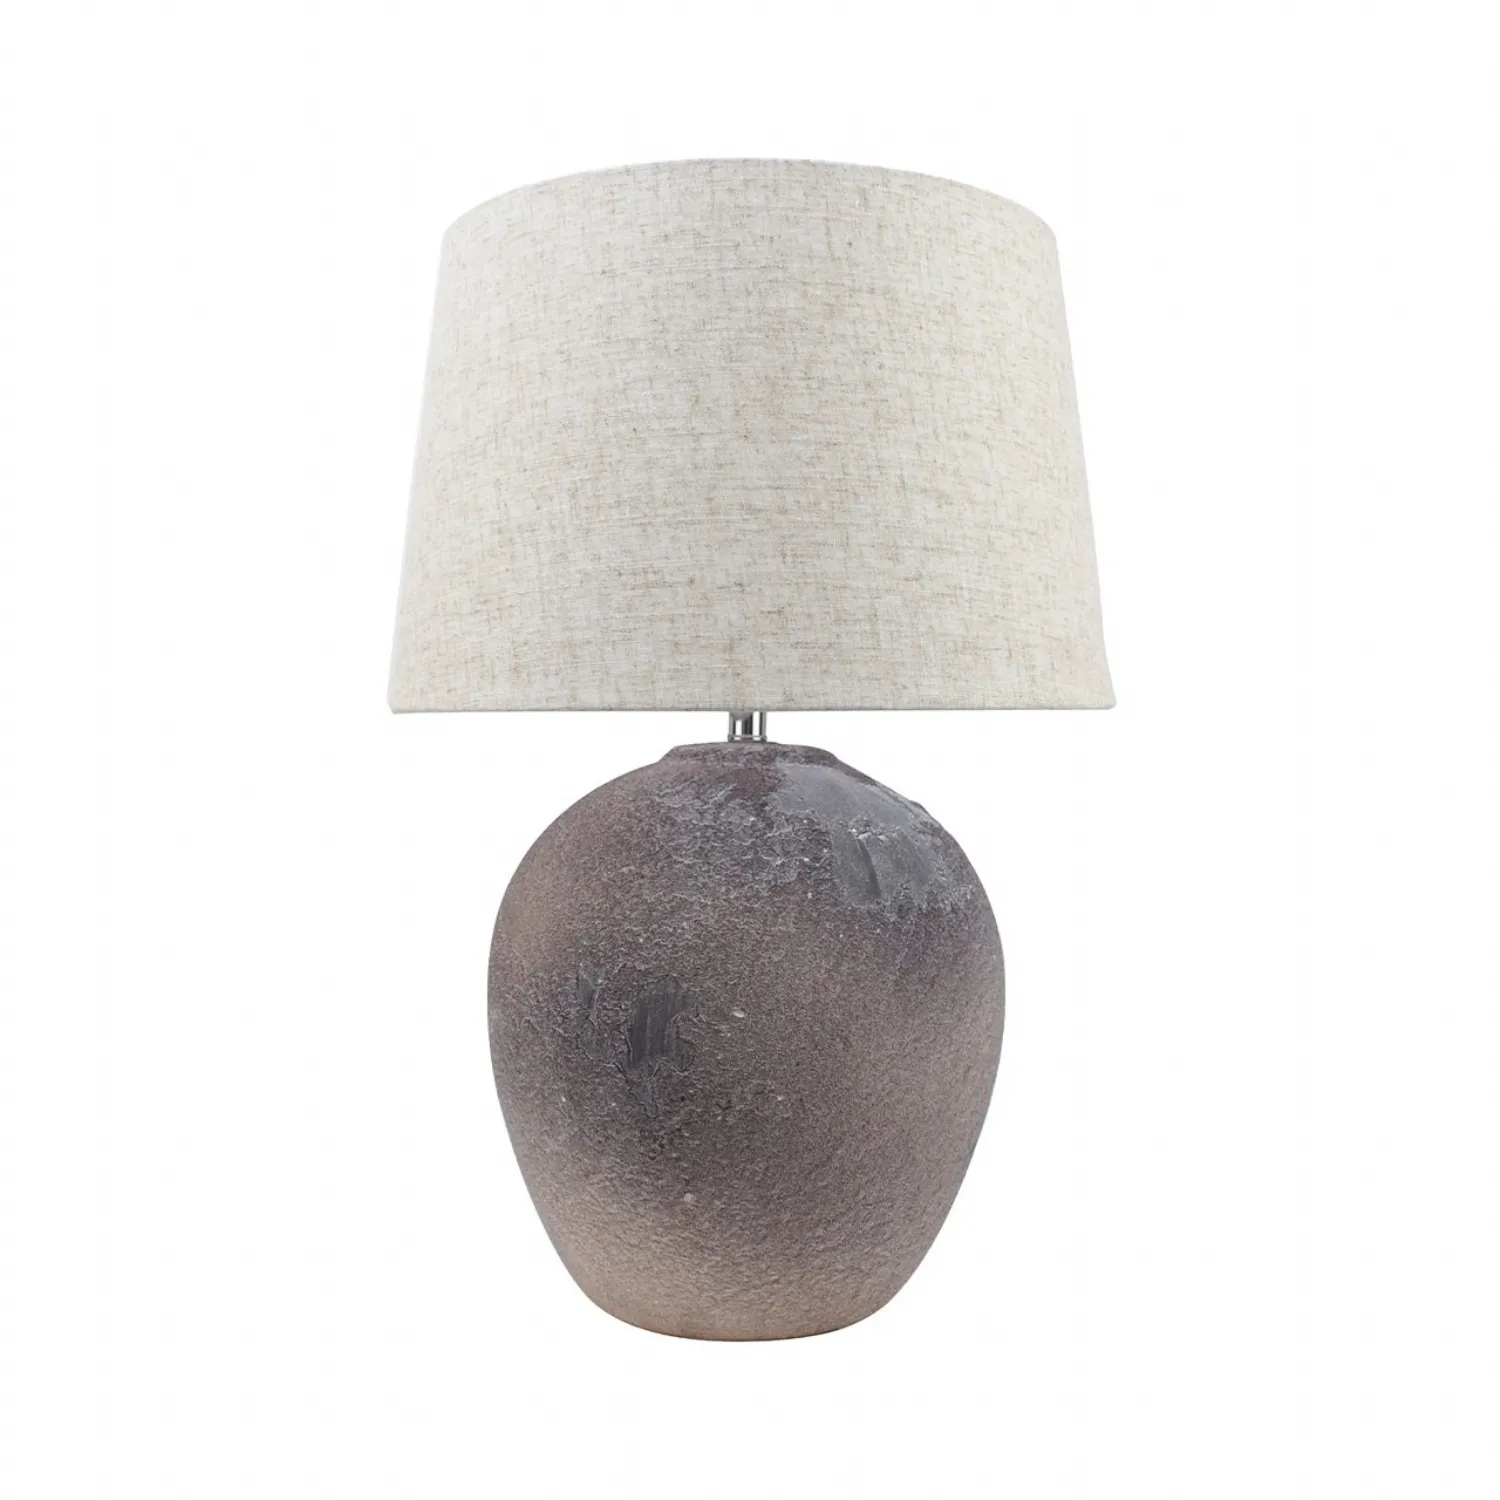 57cm Light Brown Stone Finish Table Lamp With Natural Linen Shade